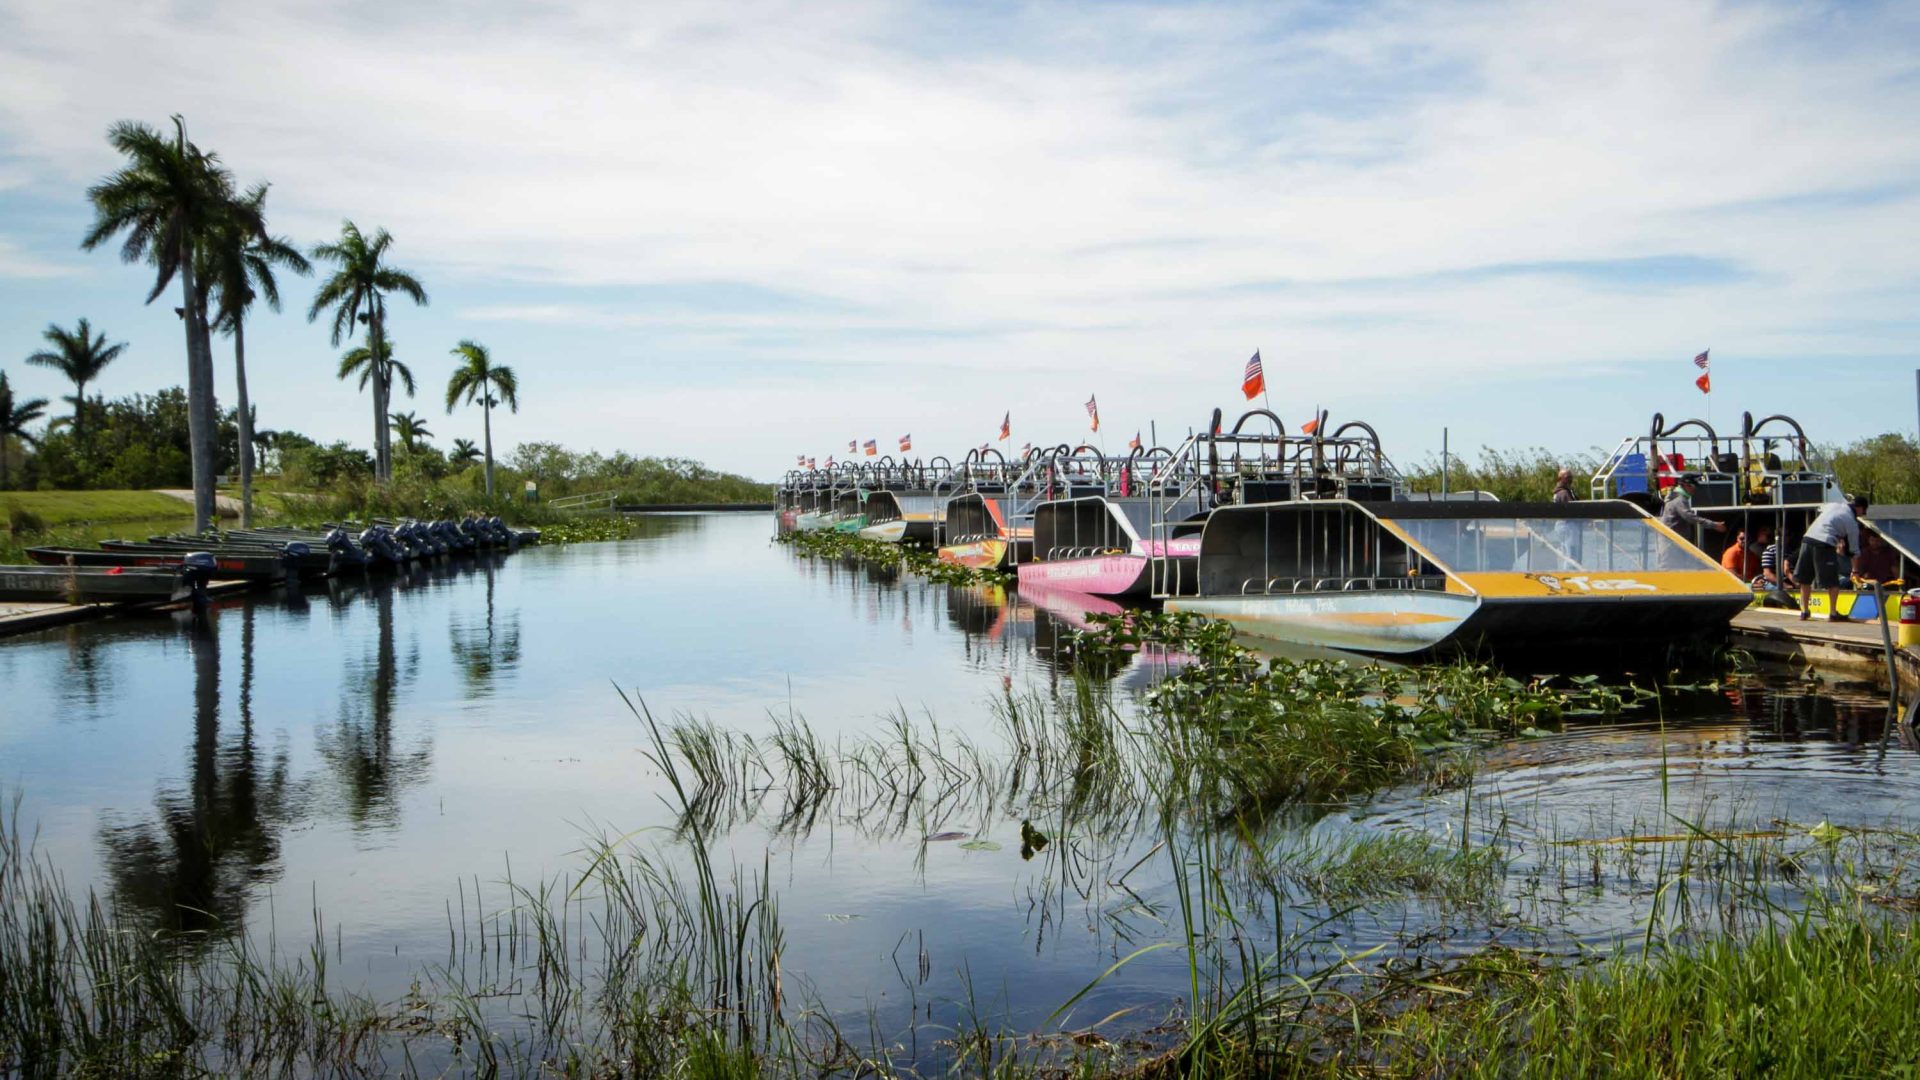 Boats for touring the Everglades sit largely empty.